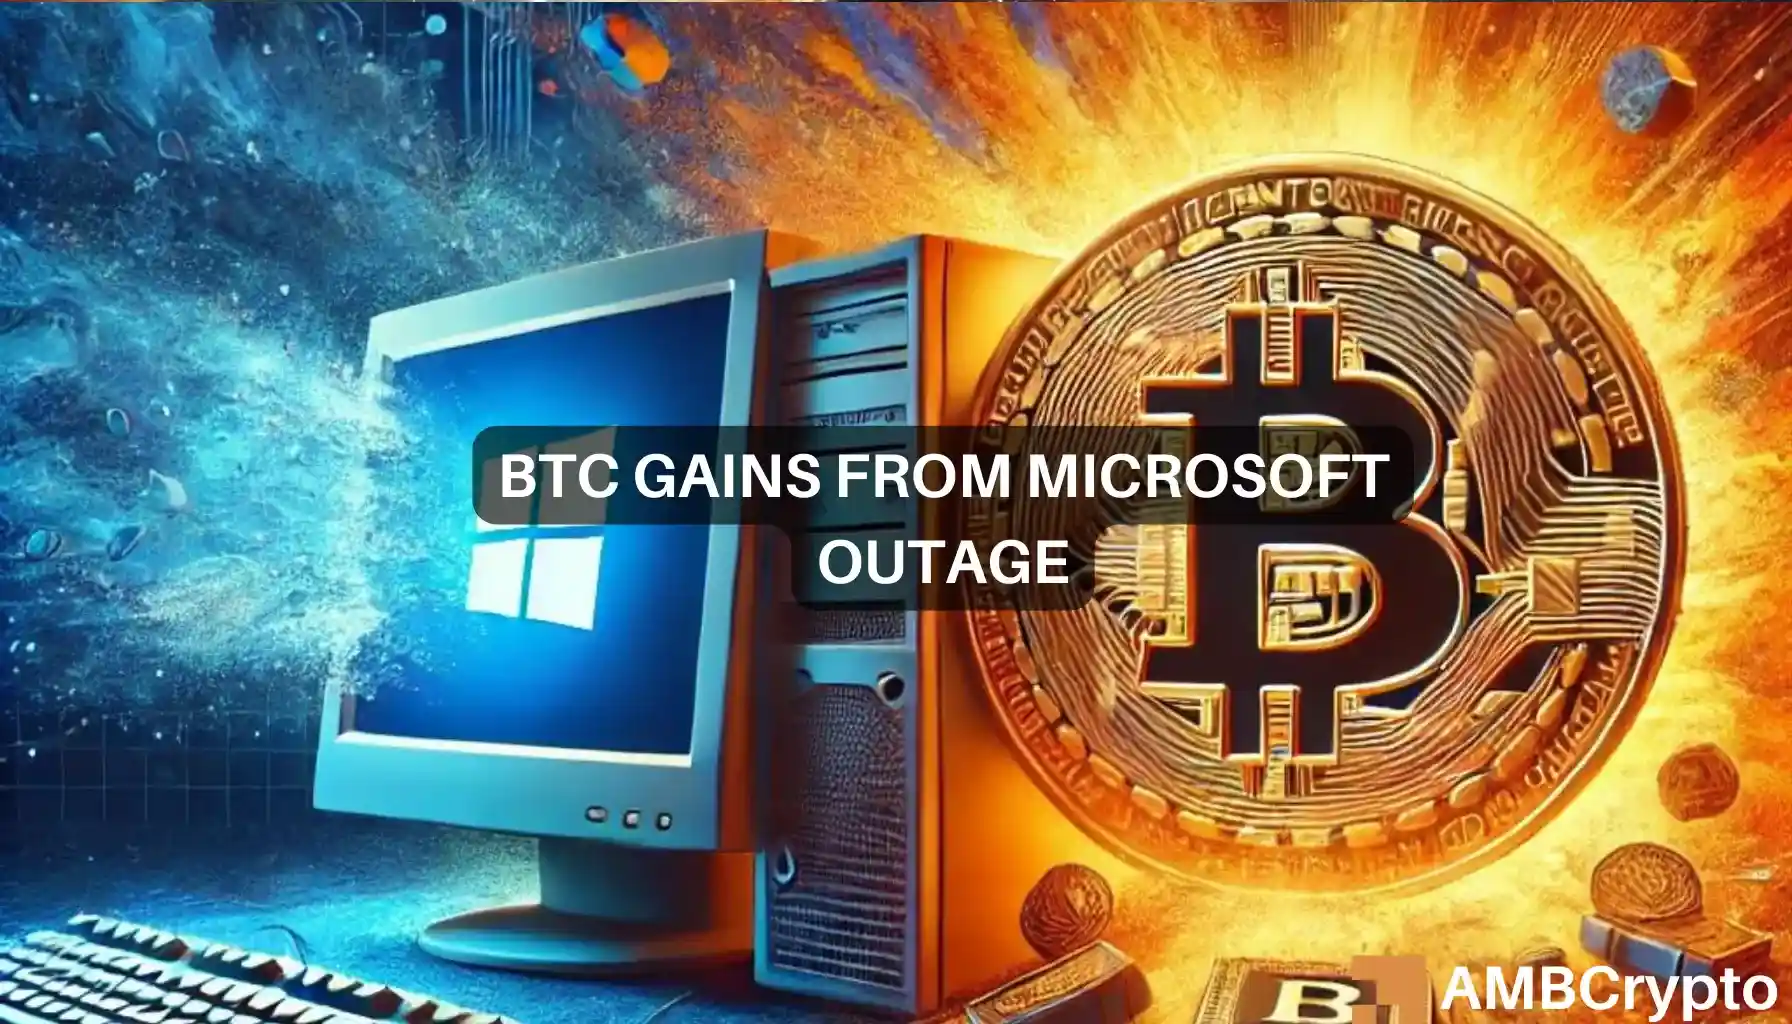 Microsoft outage: How Bitcoin thrived during the global IT shutdown